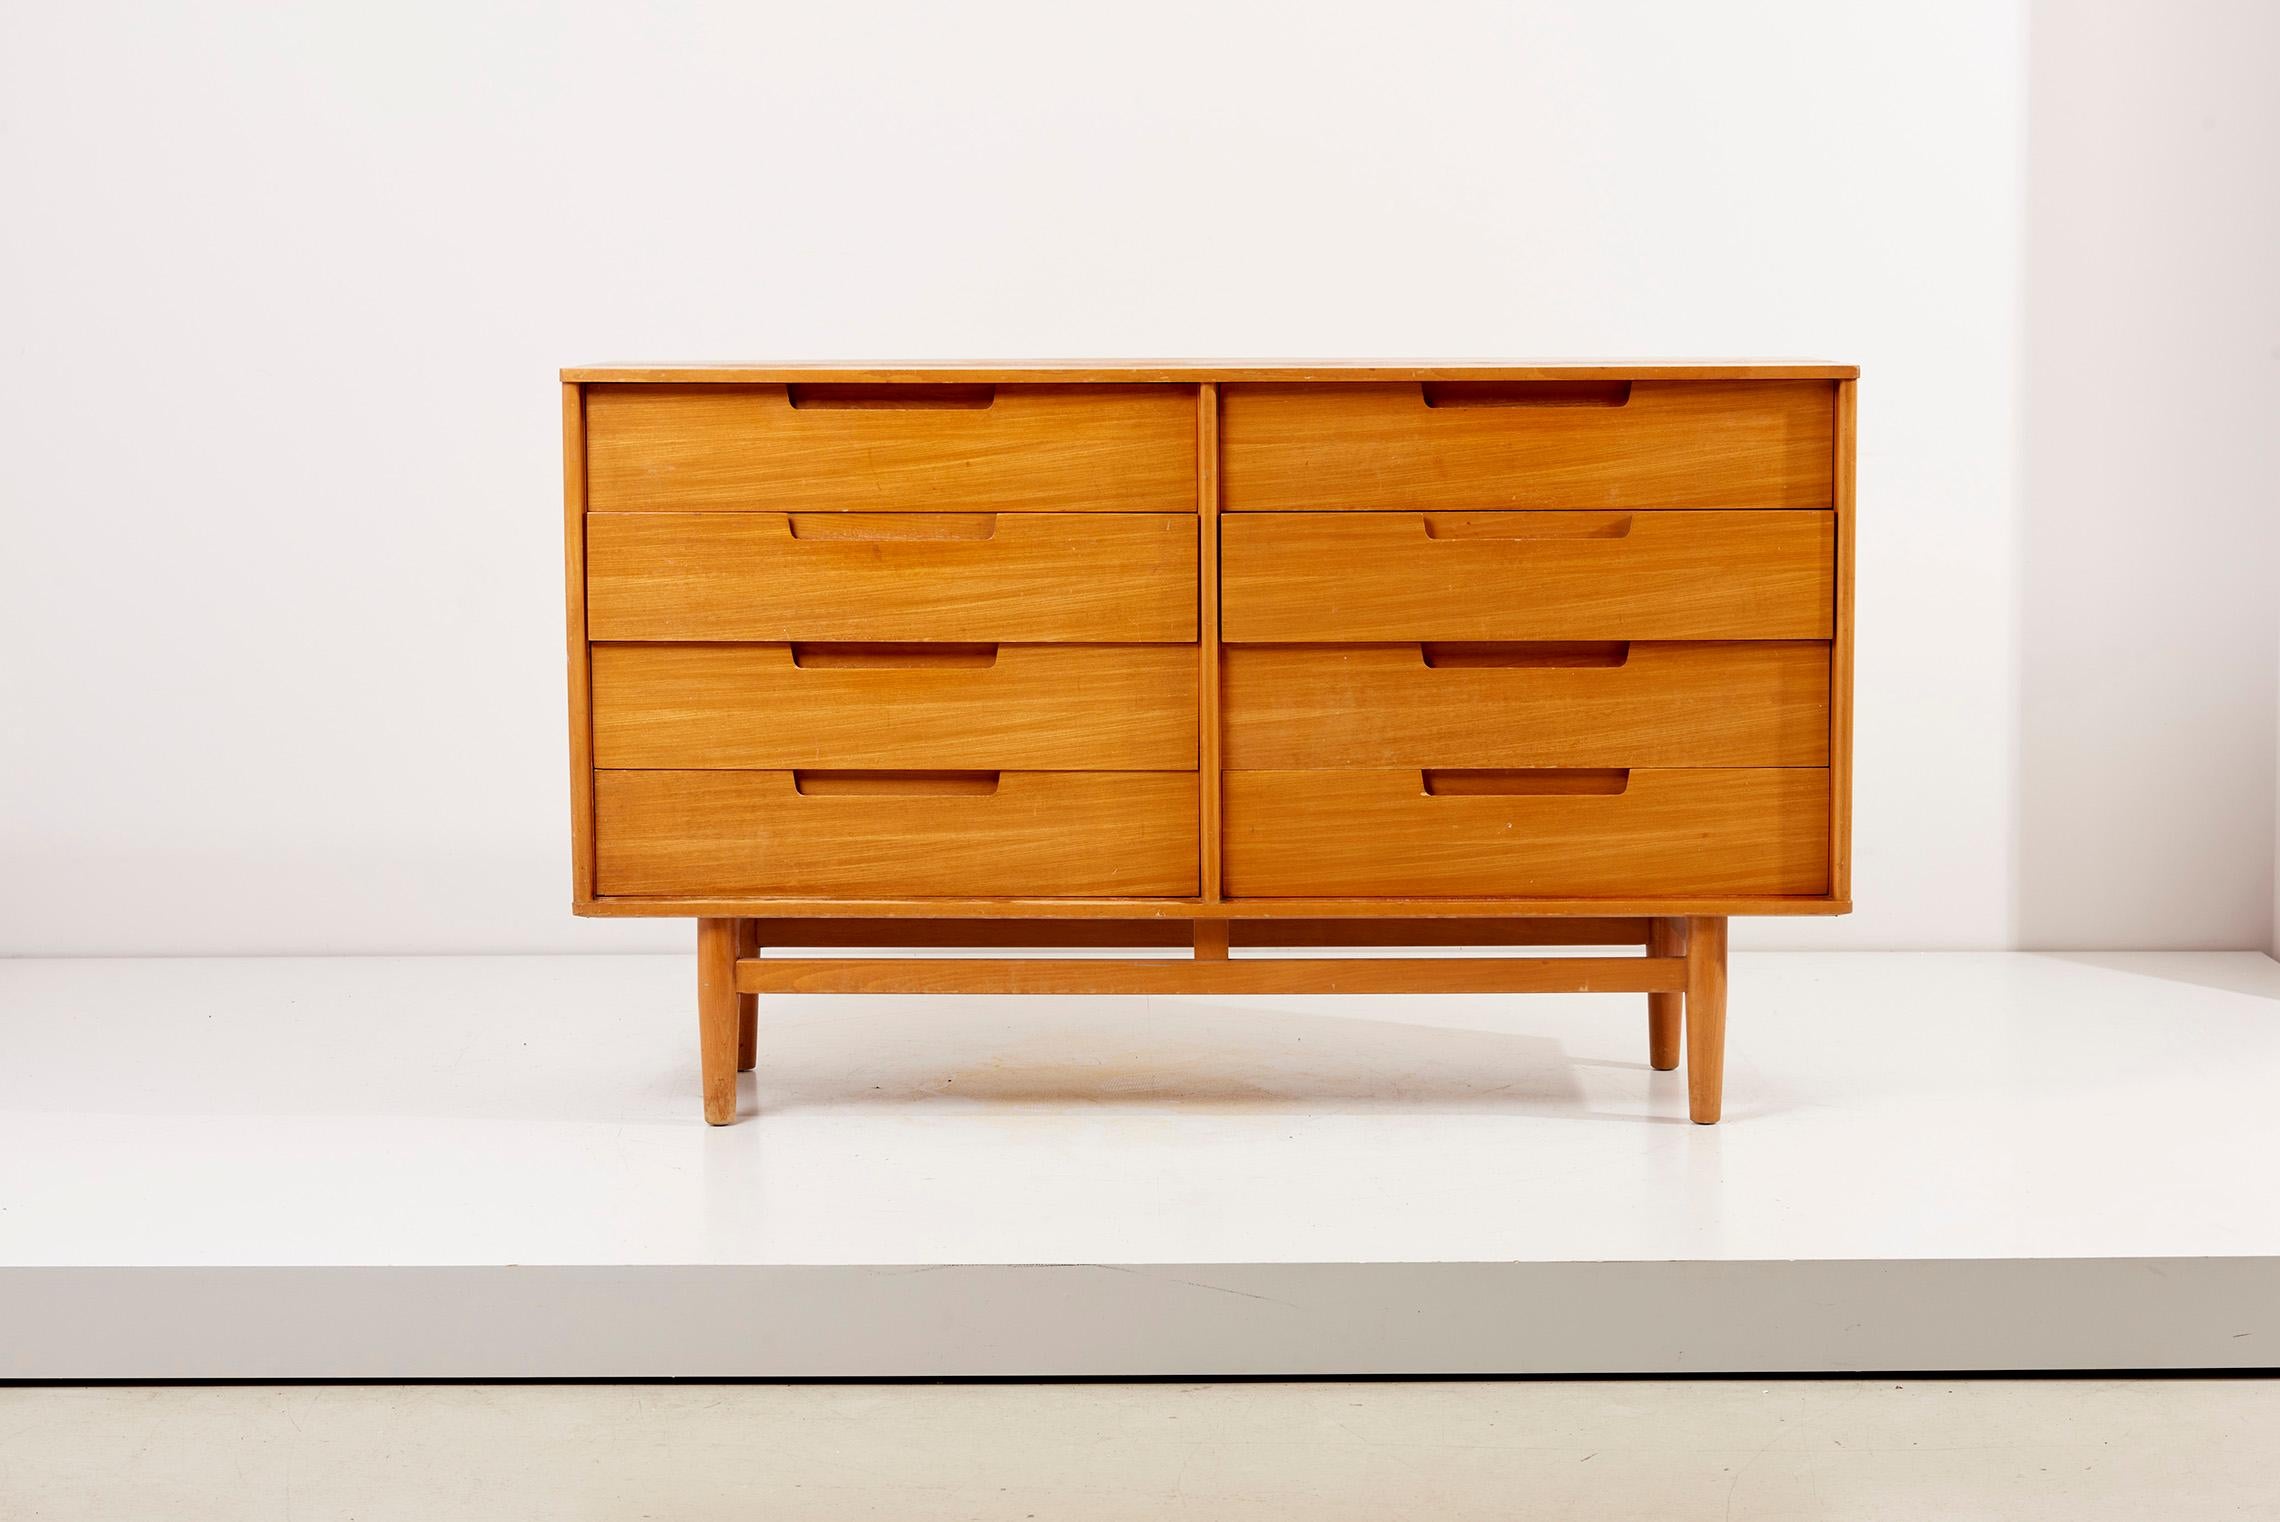 Matched pair of Milo Baughman Dressers for Drexel, USA 1950s. Both pieces have the same veneer and are in very good condition. Signed! The measurements given apply to the credenza. High Dresser: 46cm depth, 82cm width, 122cm height.